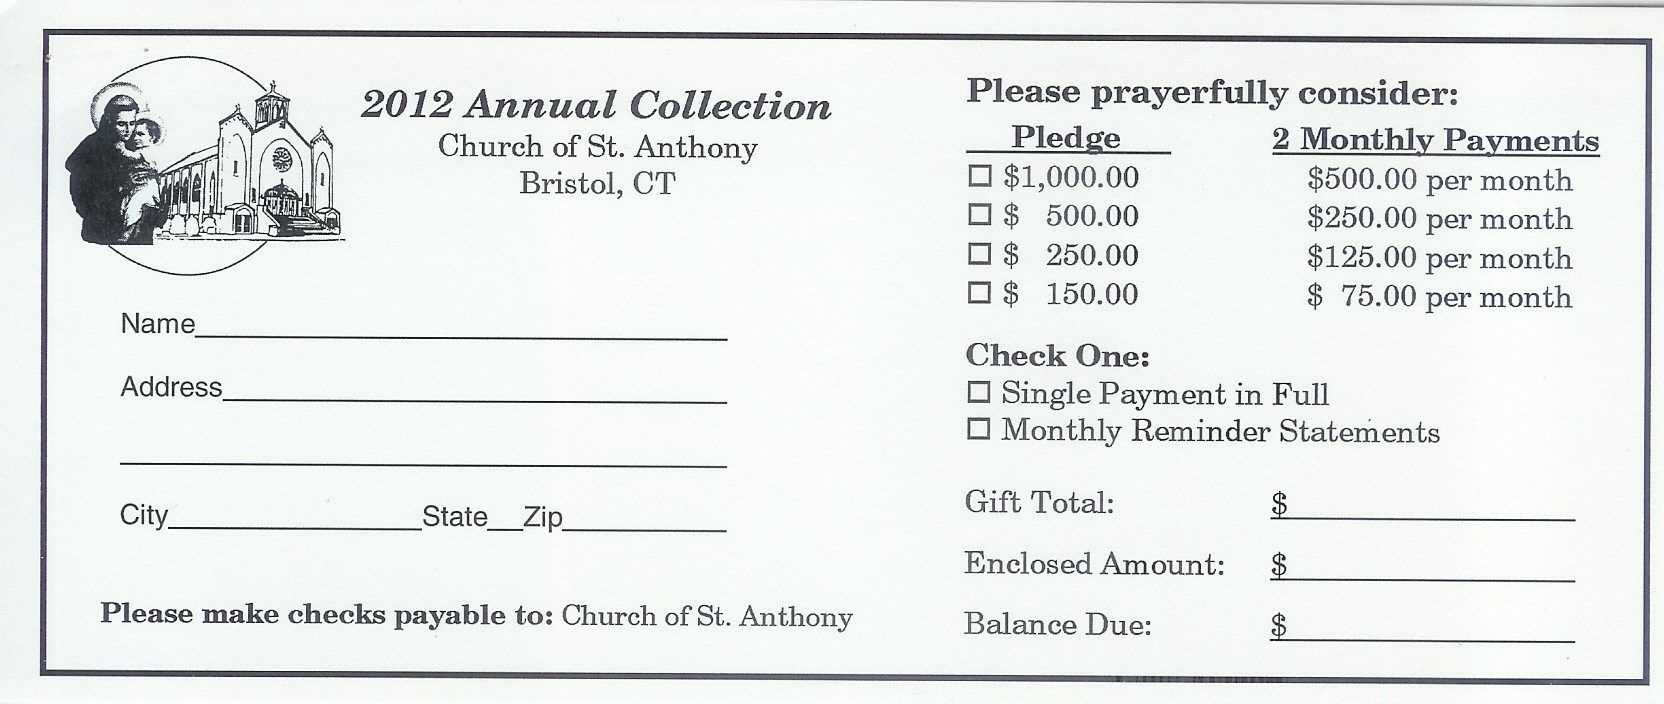 Pinandrew Martin On Pledge Cards | Fundraising Pertaining To Building Fund Pledge Card Template